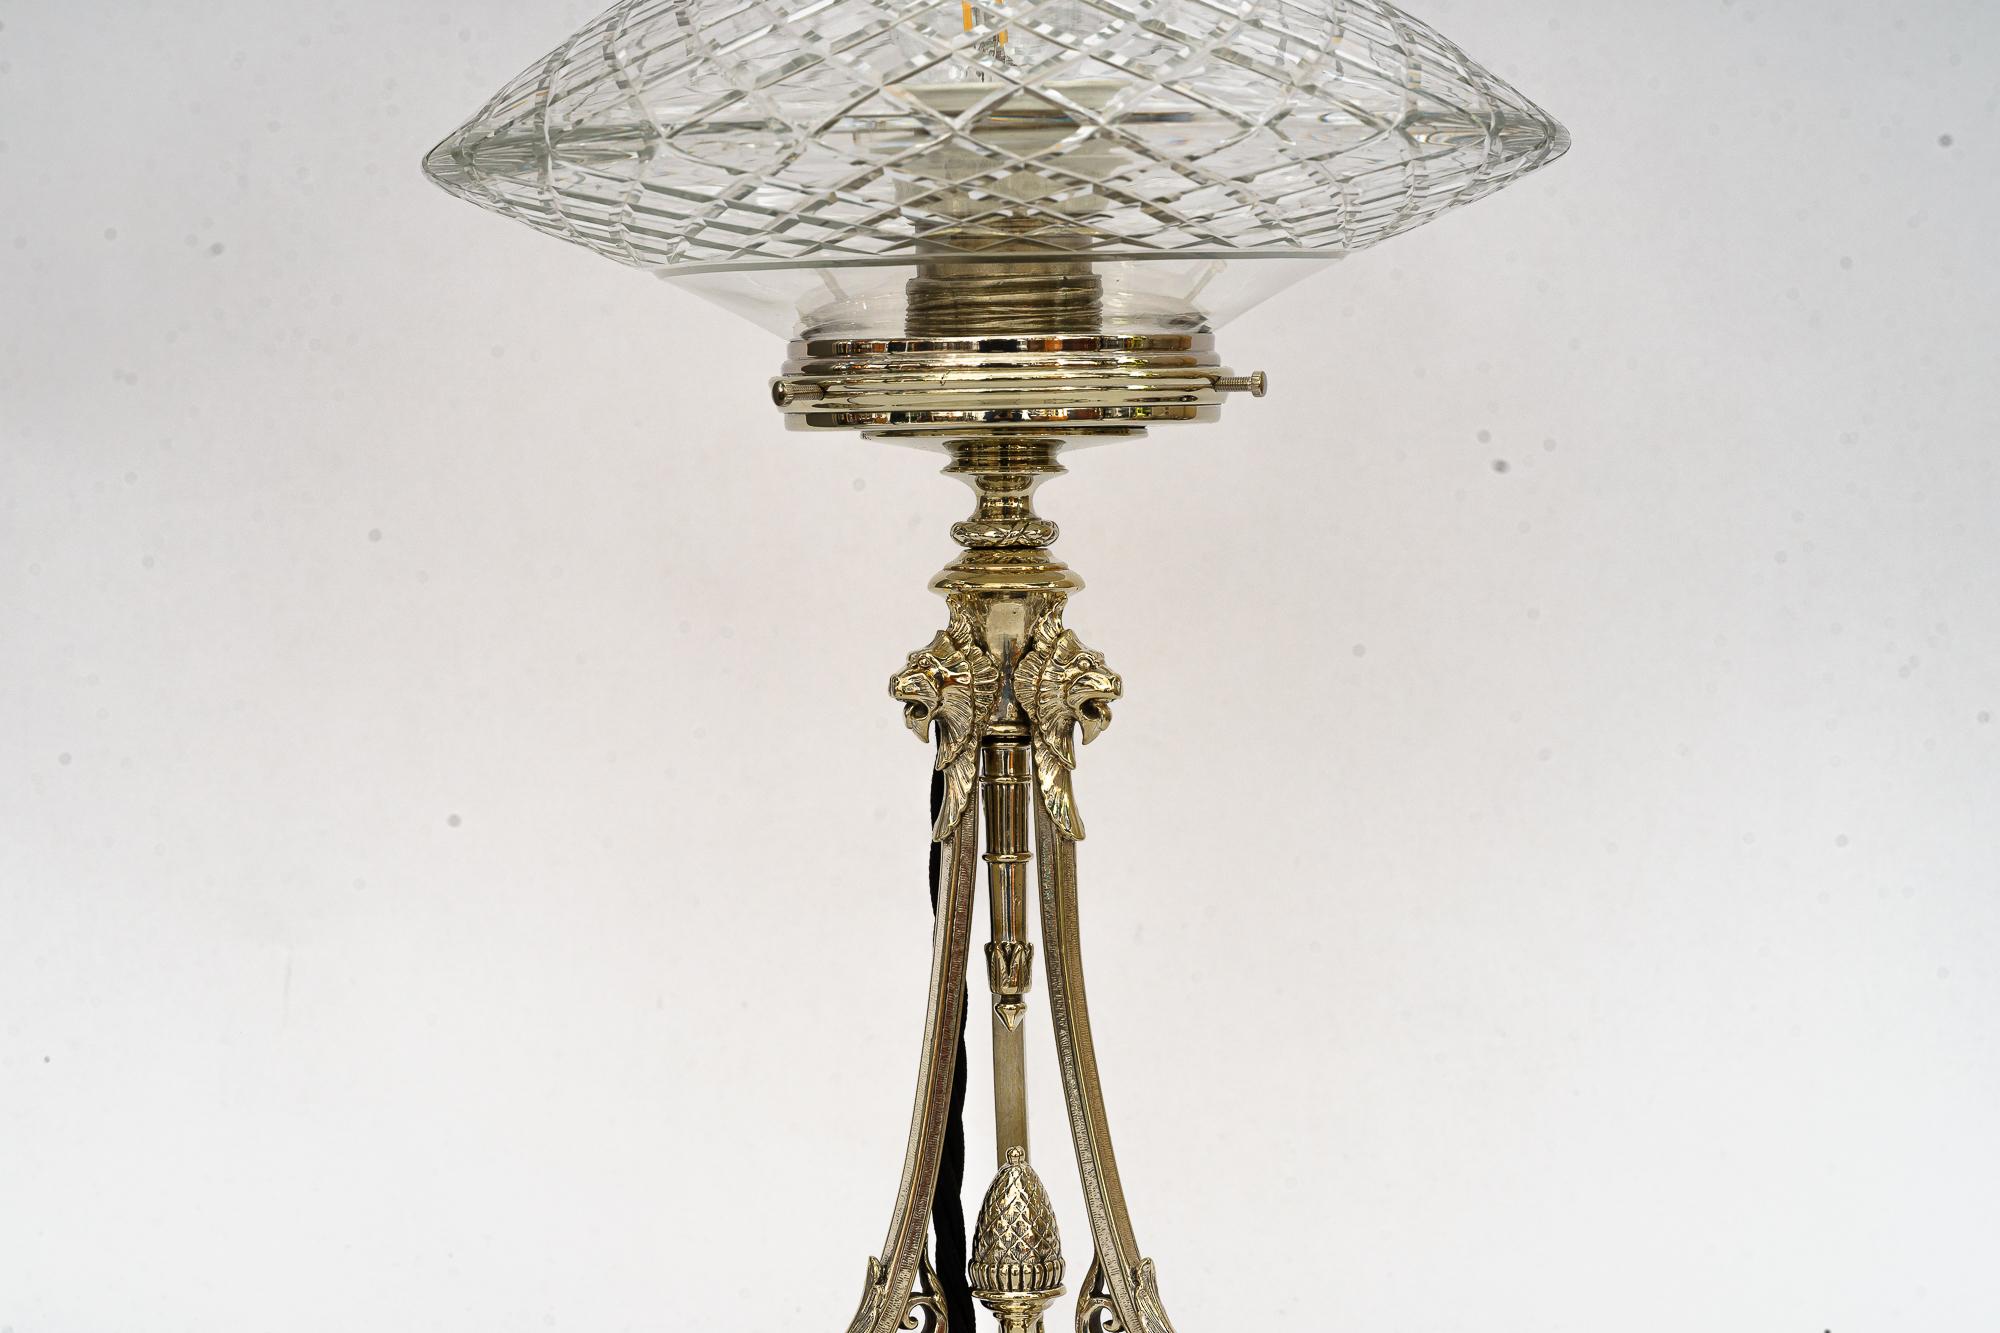 Art Deco alpaca Table lamp with cut glass shade vienna around 1920s
Only polished
Original cut glass shade.